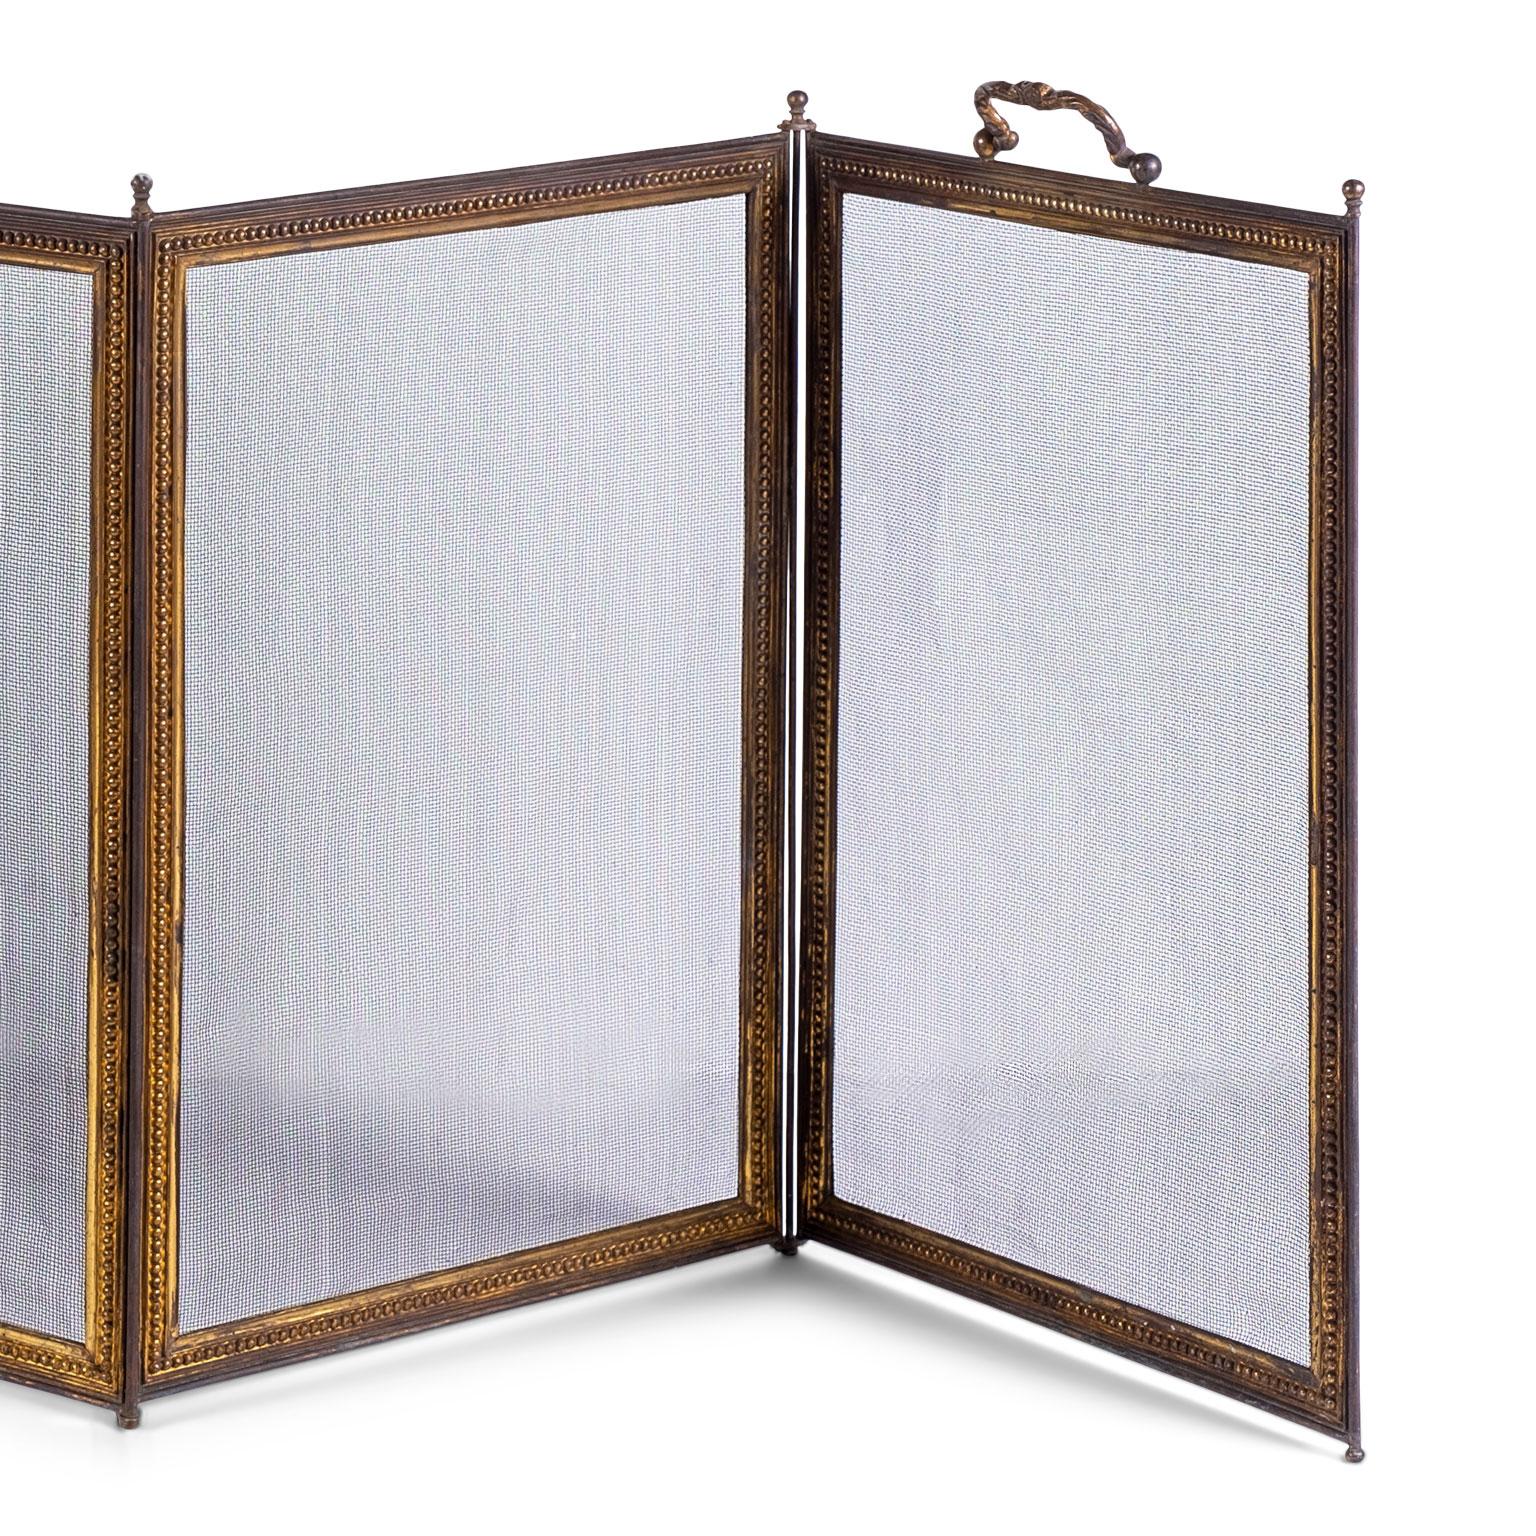 French Provincial Antique Fire Screen